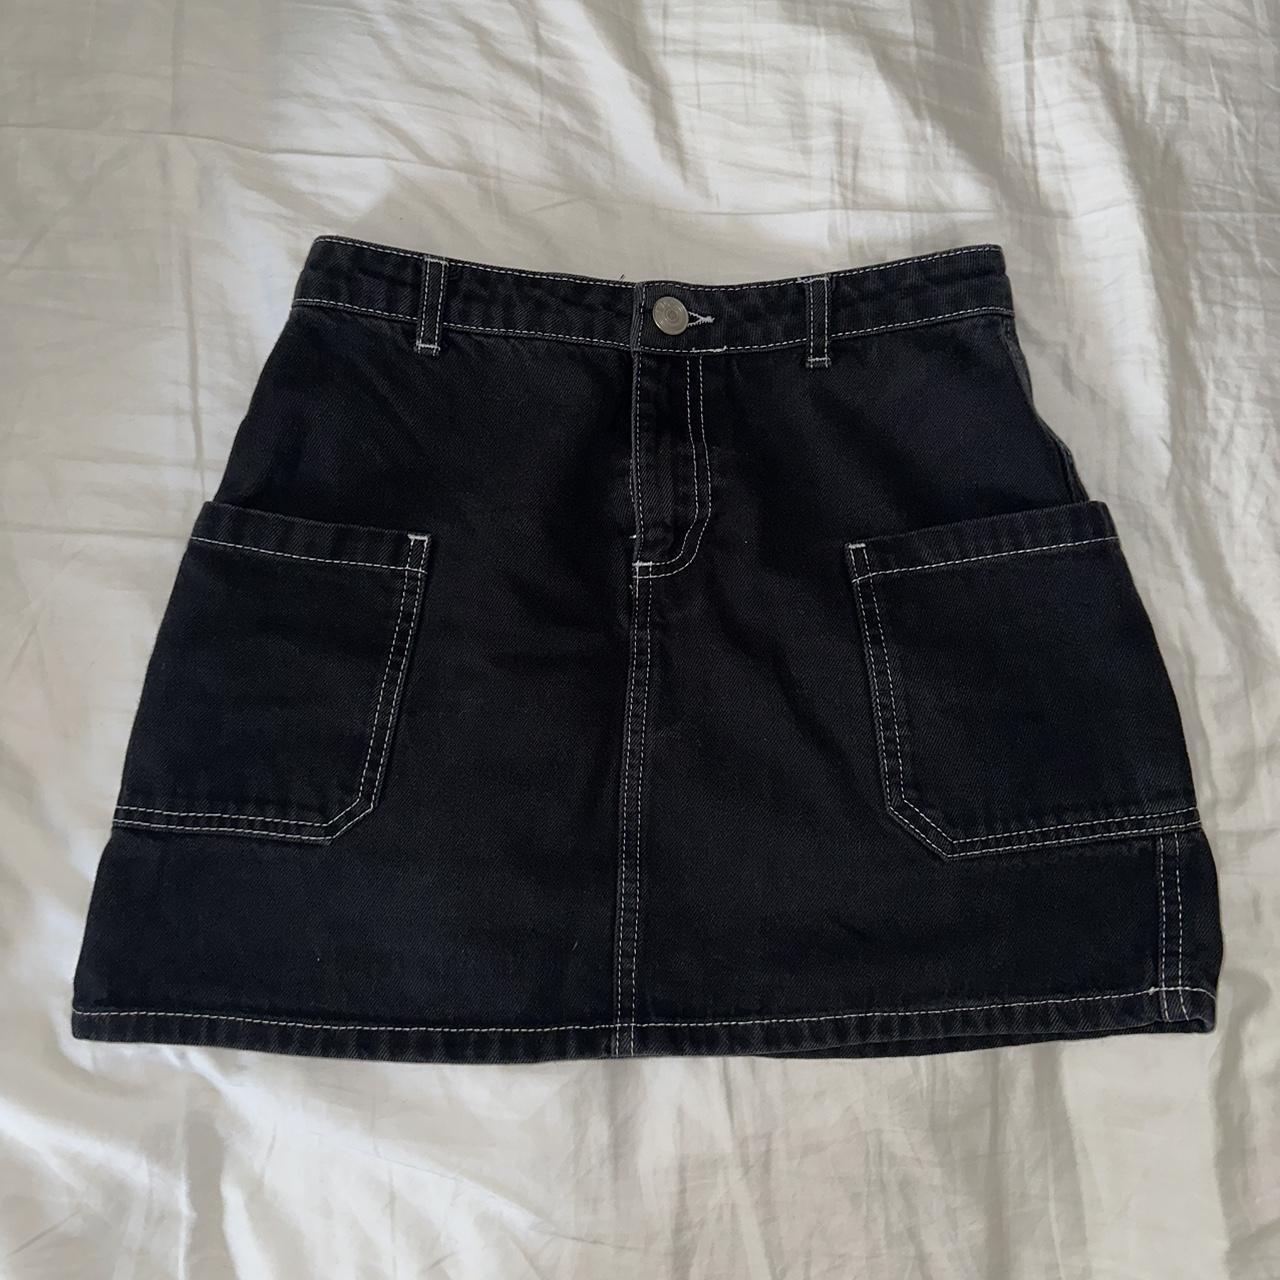 BDG MINI SKIRT IN BLACK WITH WHITE LINING Has a... - Depop